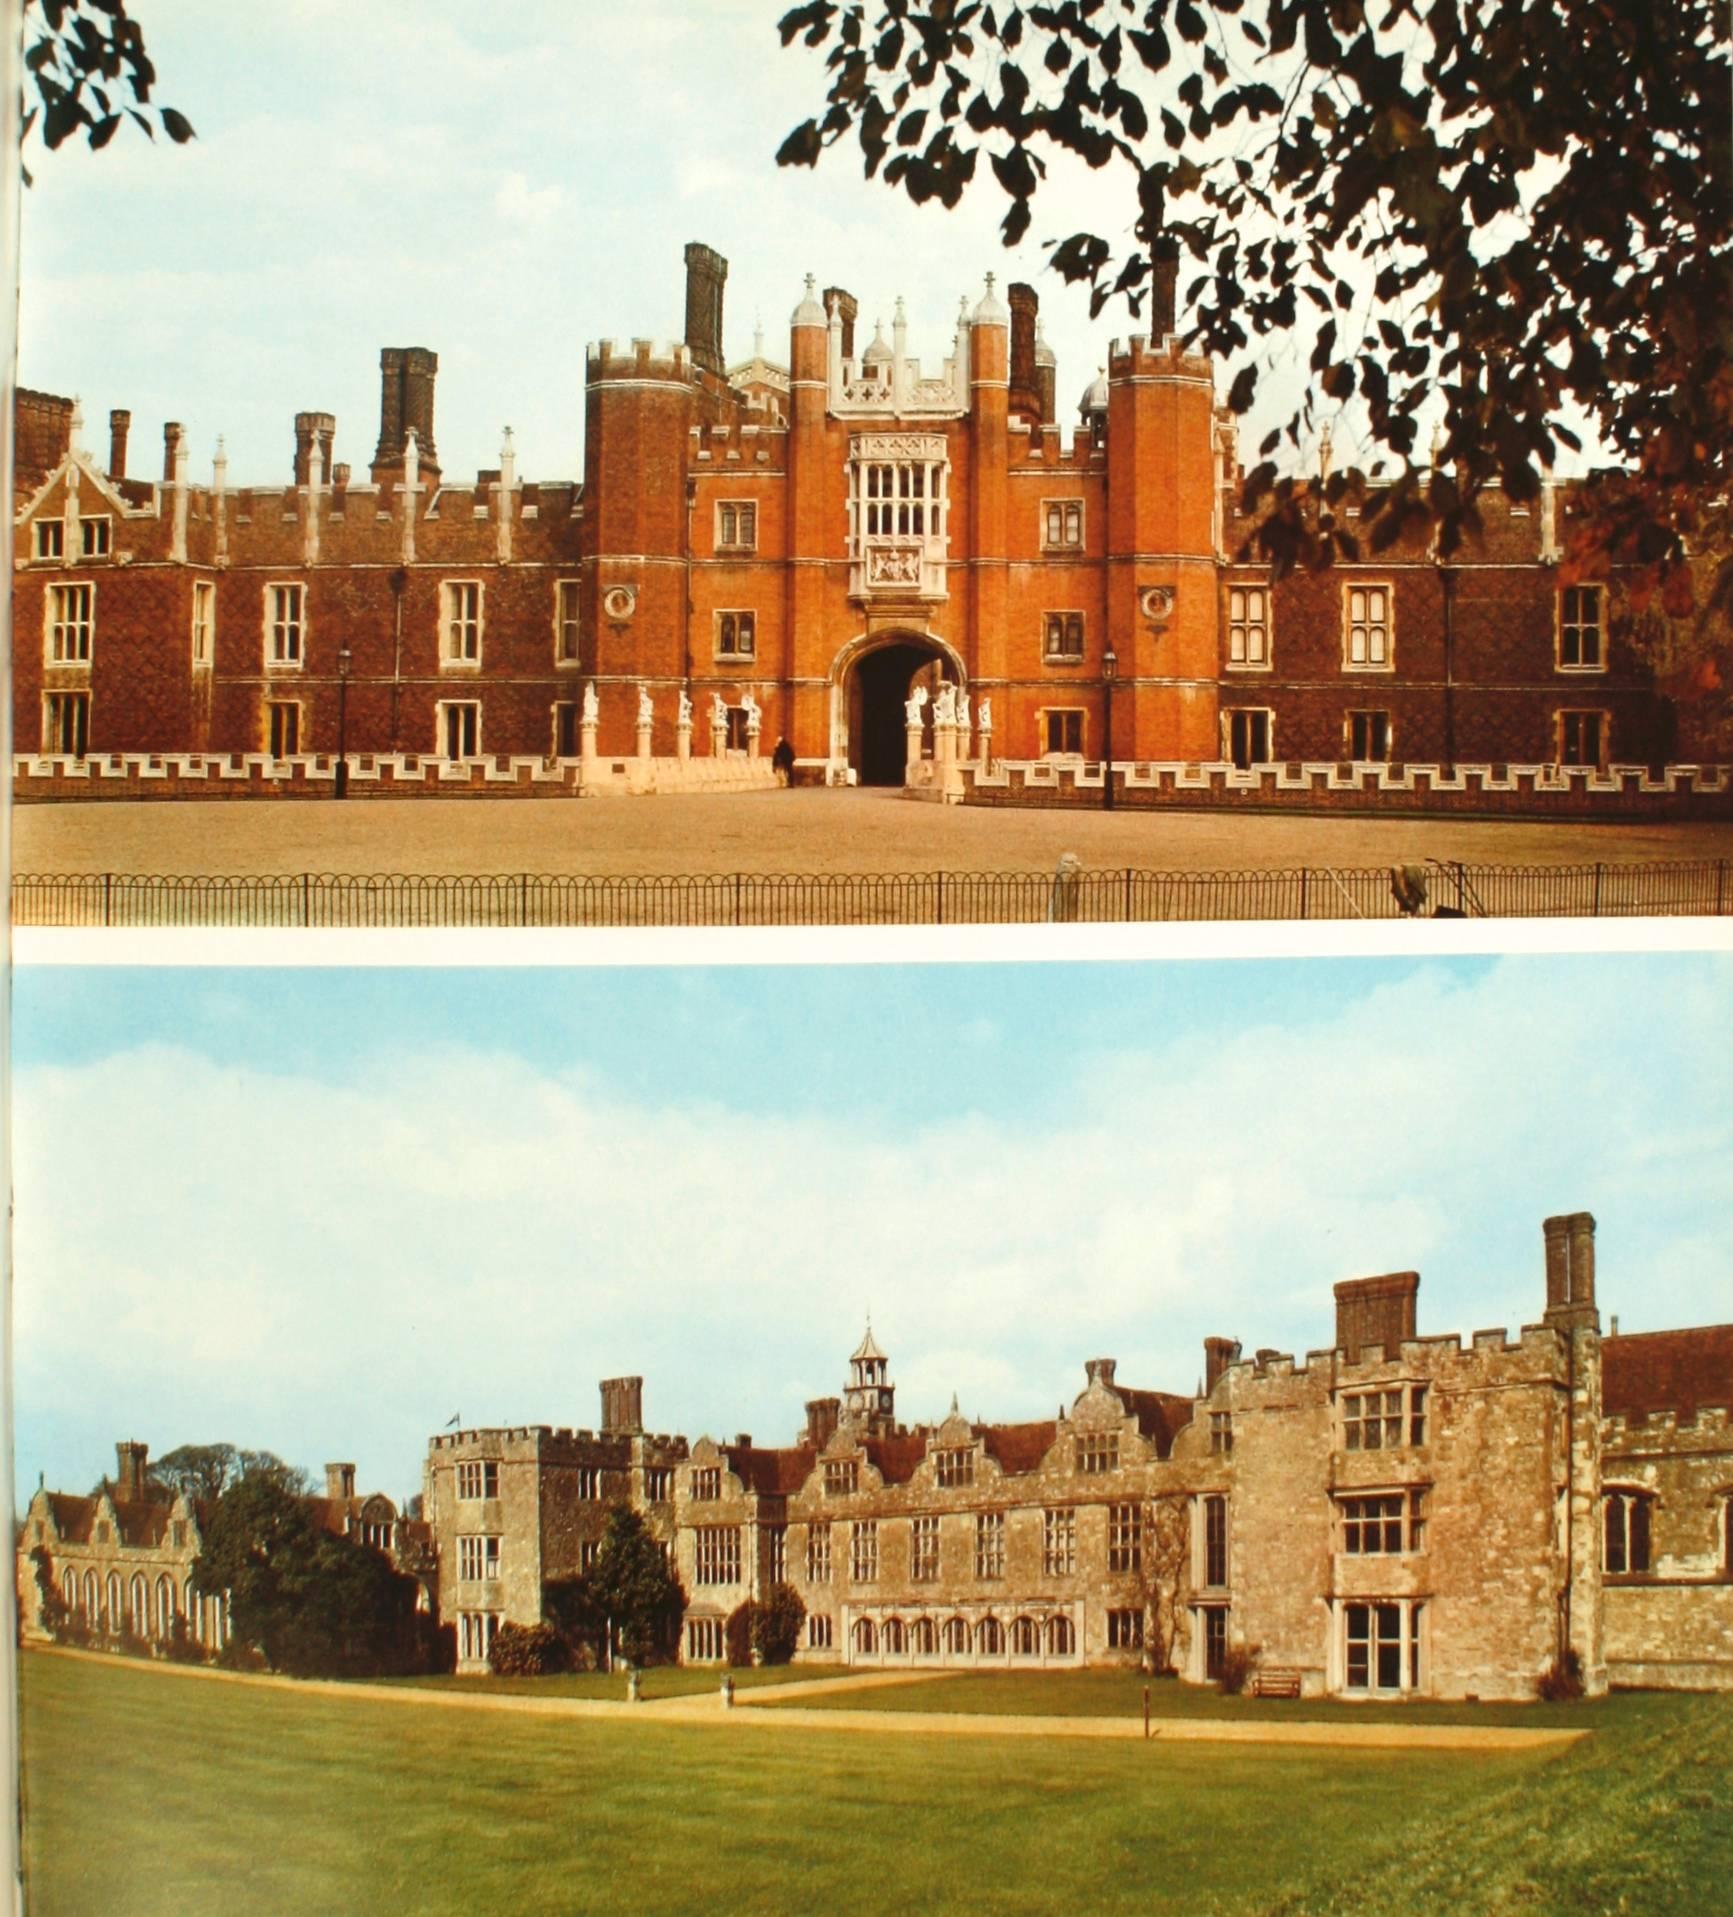 A pictorial History of English Architecture by John Betjeman. New York: The Macmillan Company, 1972. Stated first American edition hardcover with dust jacket. 112 pp. A pictorial tour of English architecture from Prehistoric standing stones to